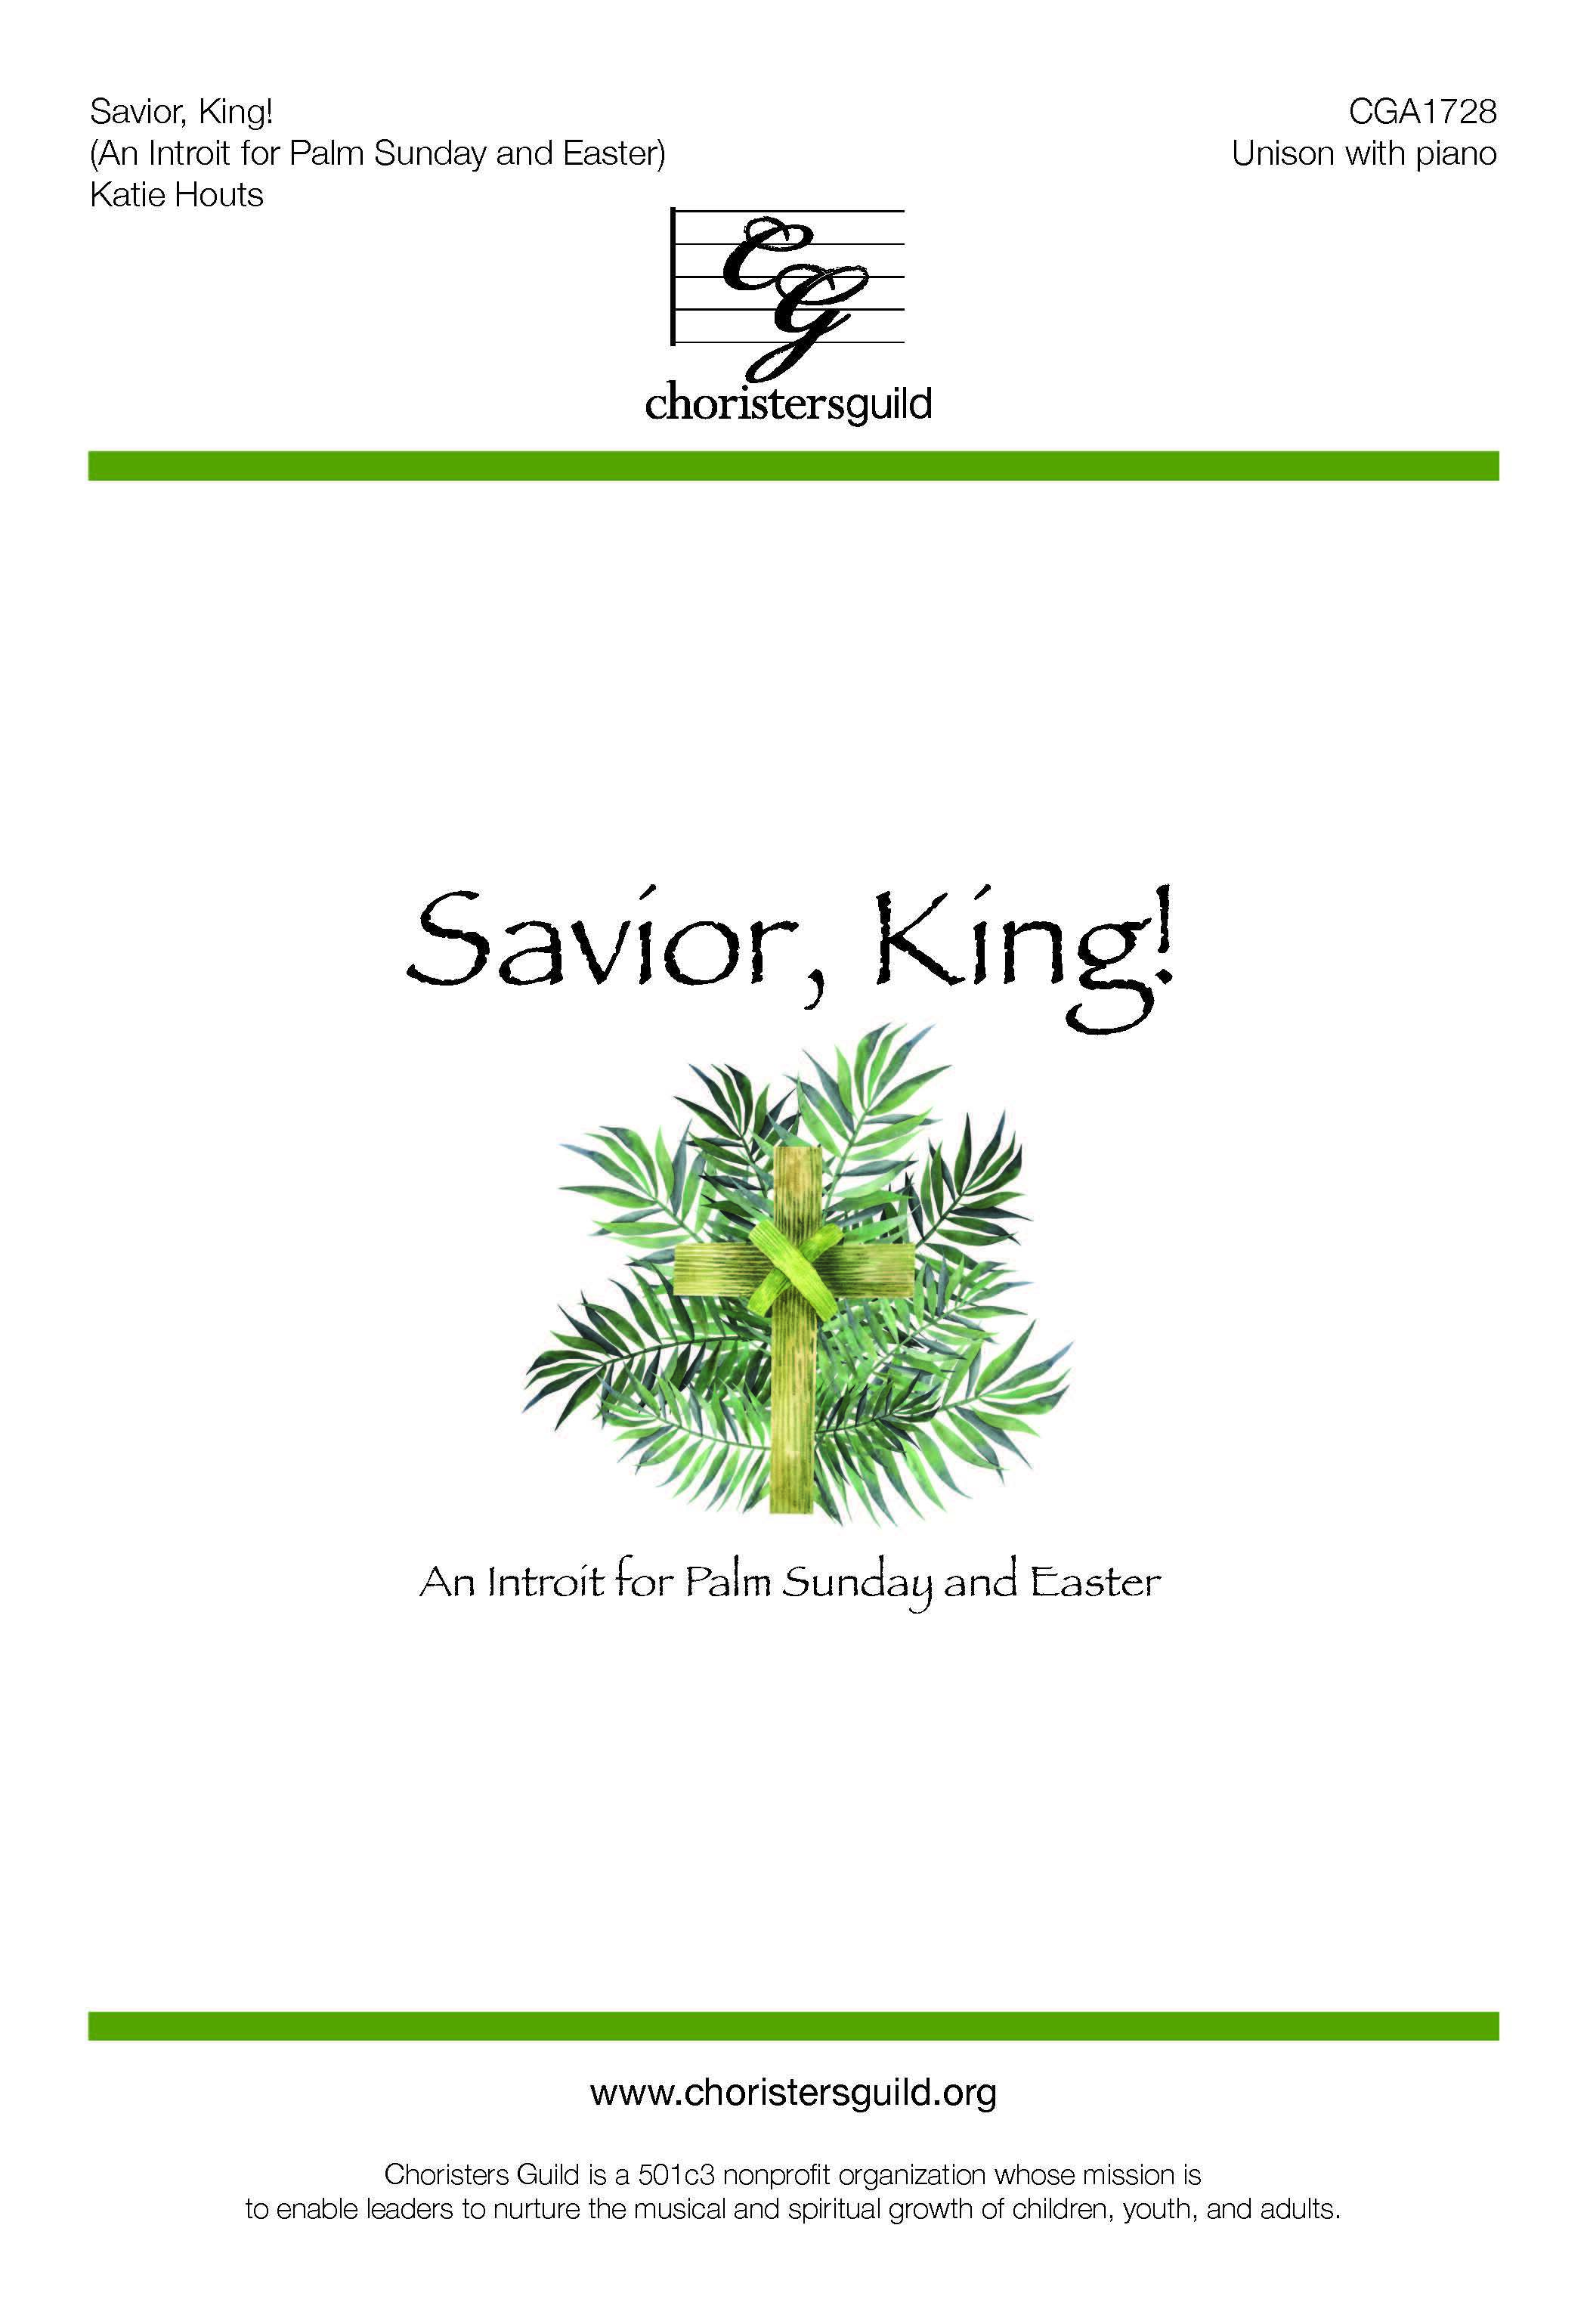 Savior, King! (An Introit for Palm Sunday and Easter) - Unison